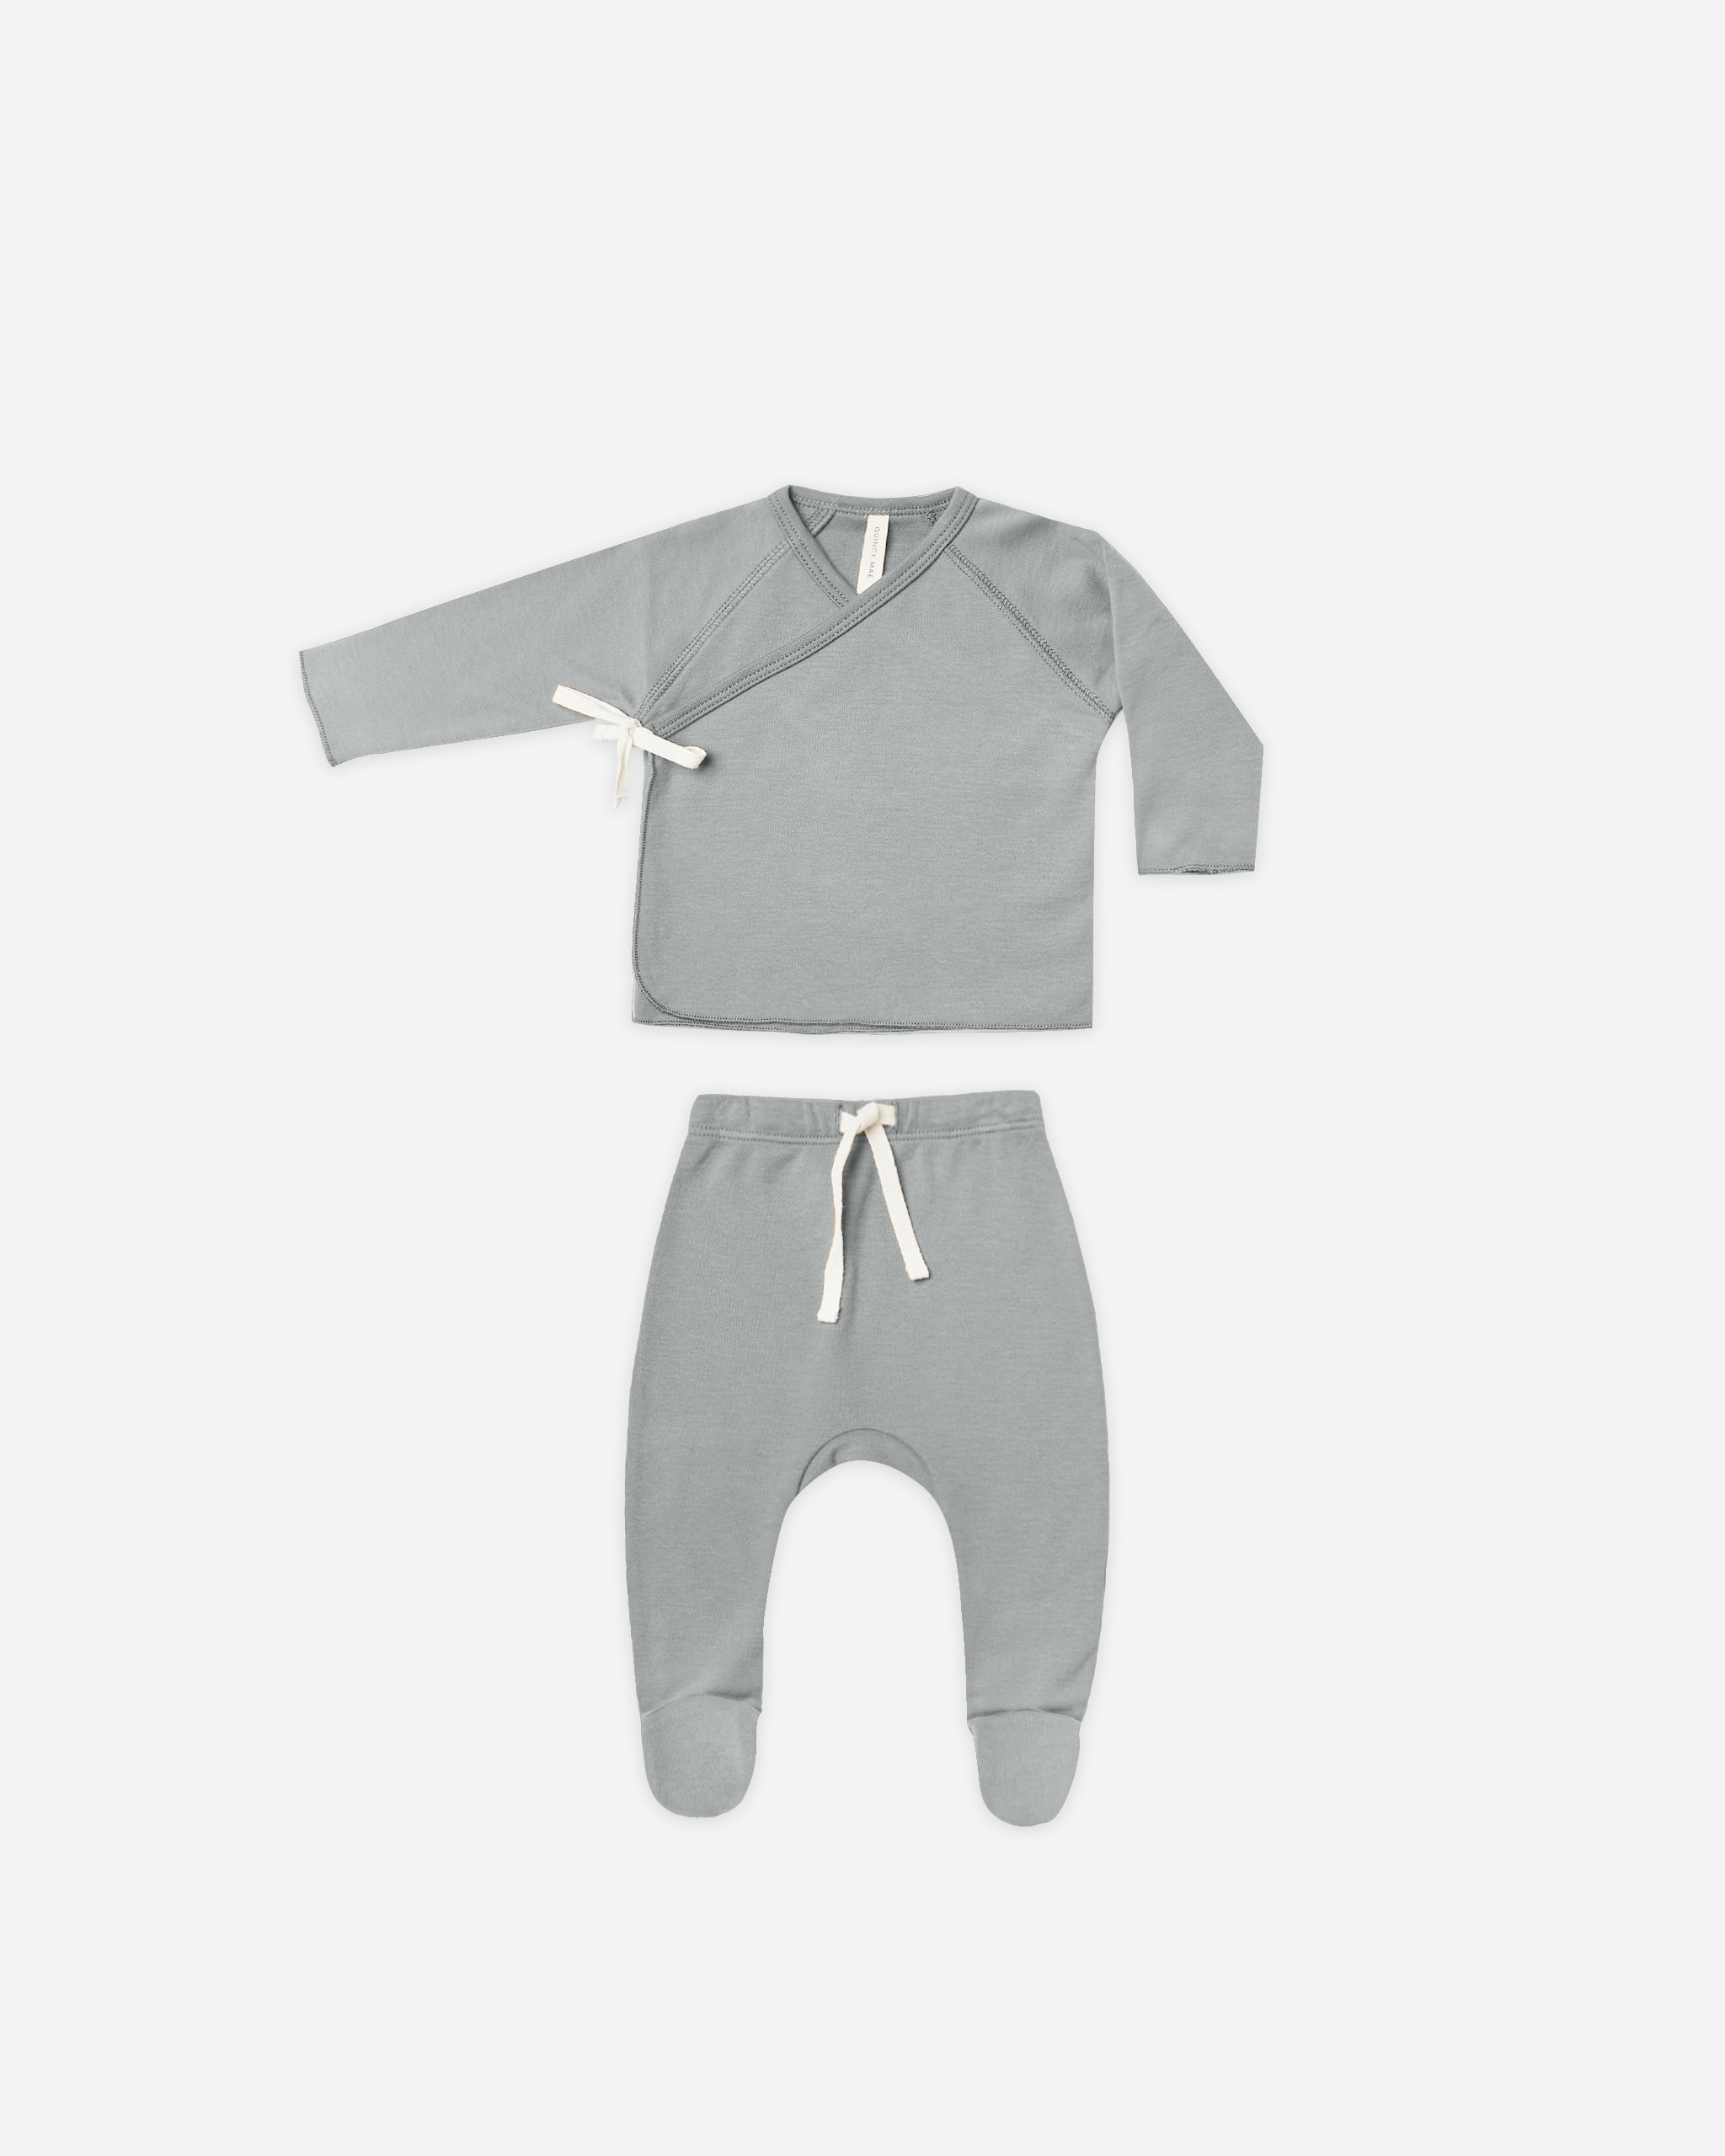 Wrap Top + Footed Pant Set || Dusty Blue - Rylee + Cru | Kids Clothes | Trendy Baby Clothes | Modern Infant Outfits |